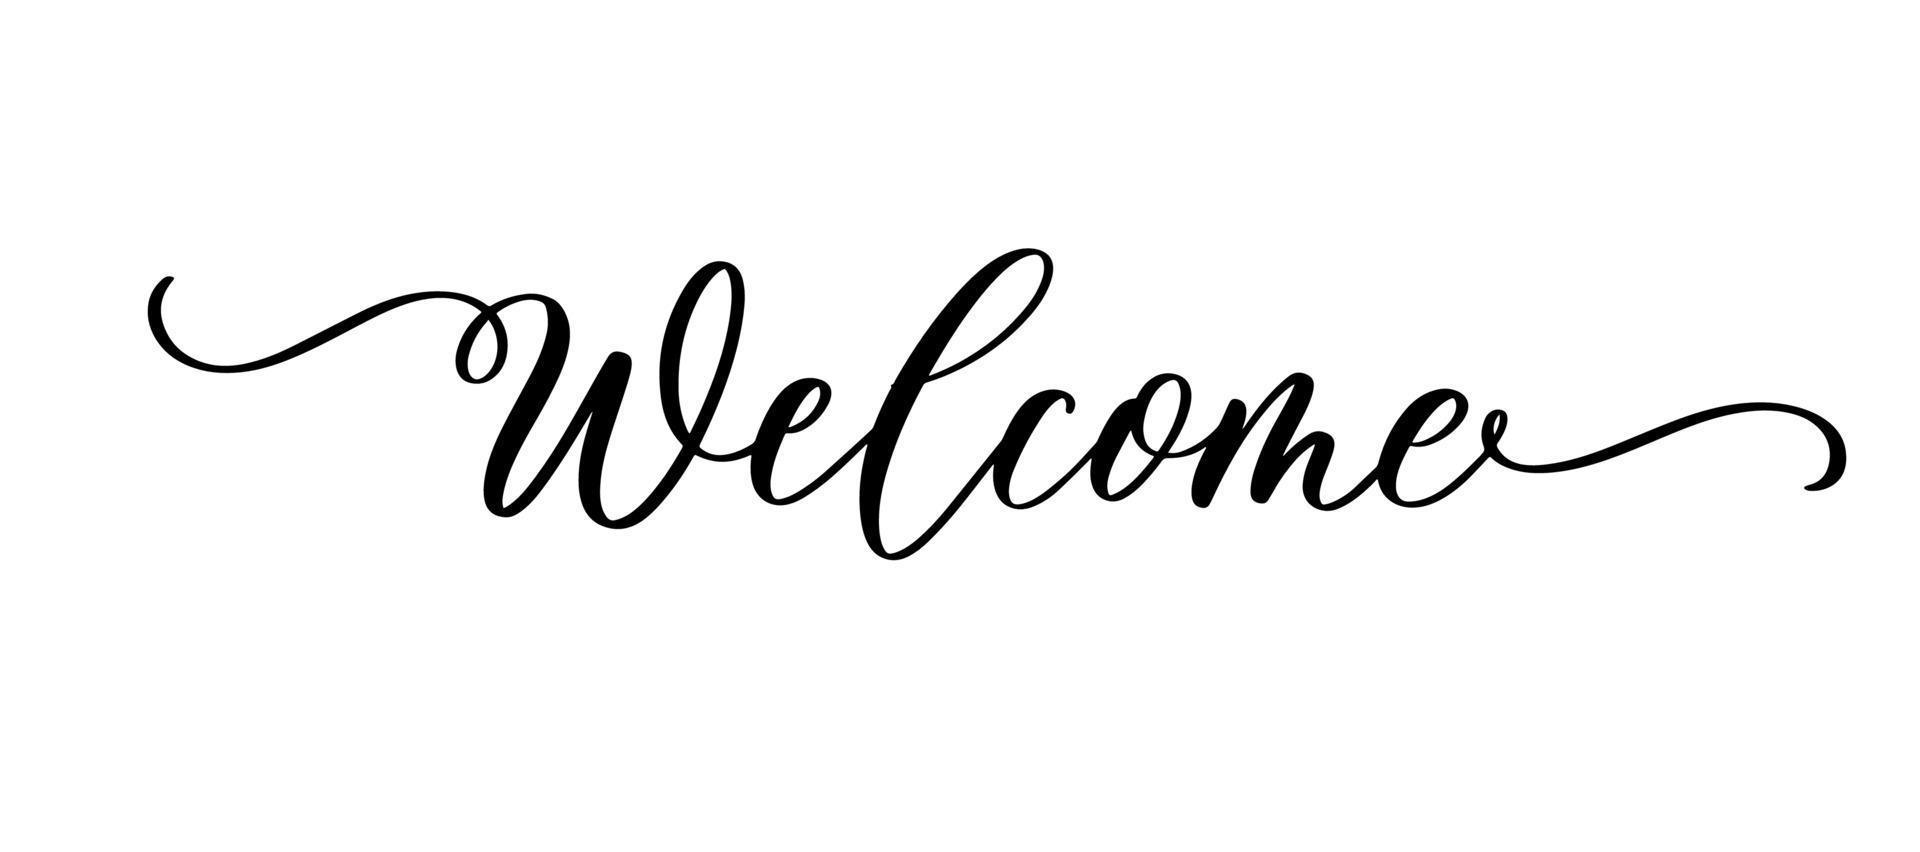 Welcome - calligraphic inscription with smooth lines. 7229427 Vector ...